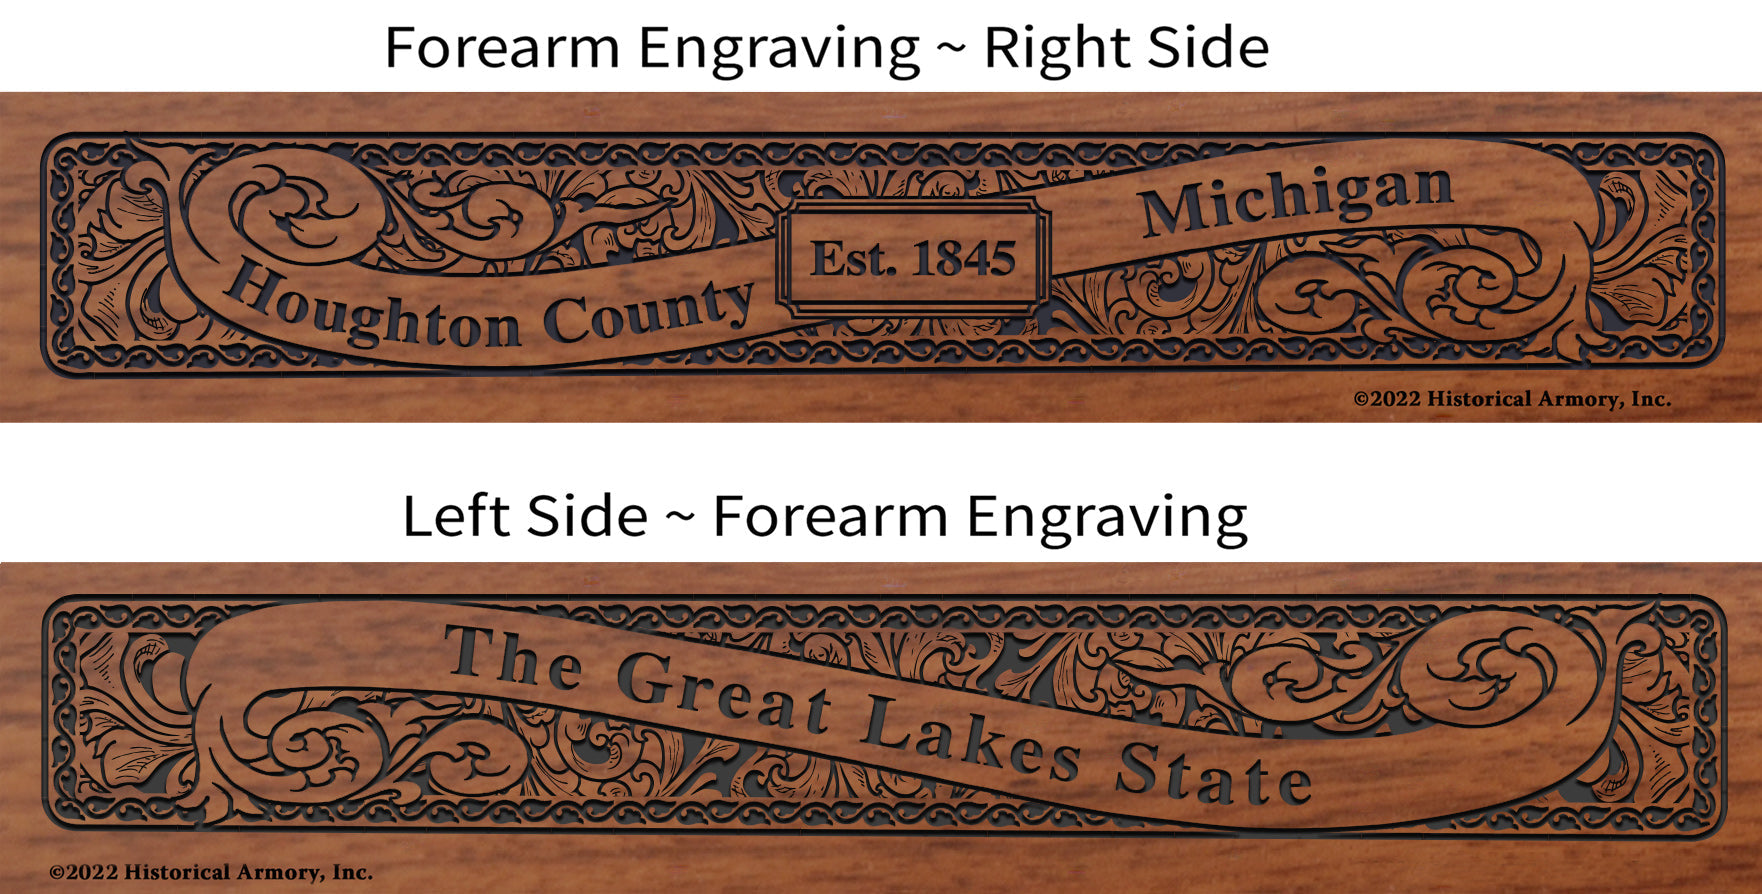 Houghton County Michigan Engraved Rifle Forearm